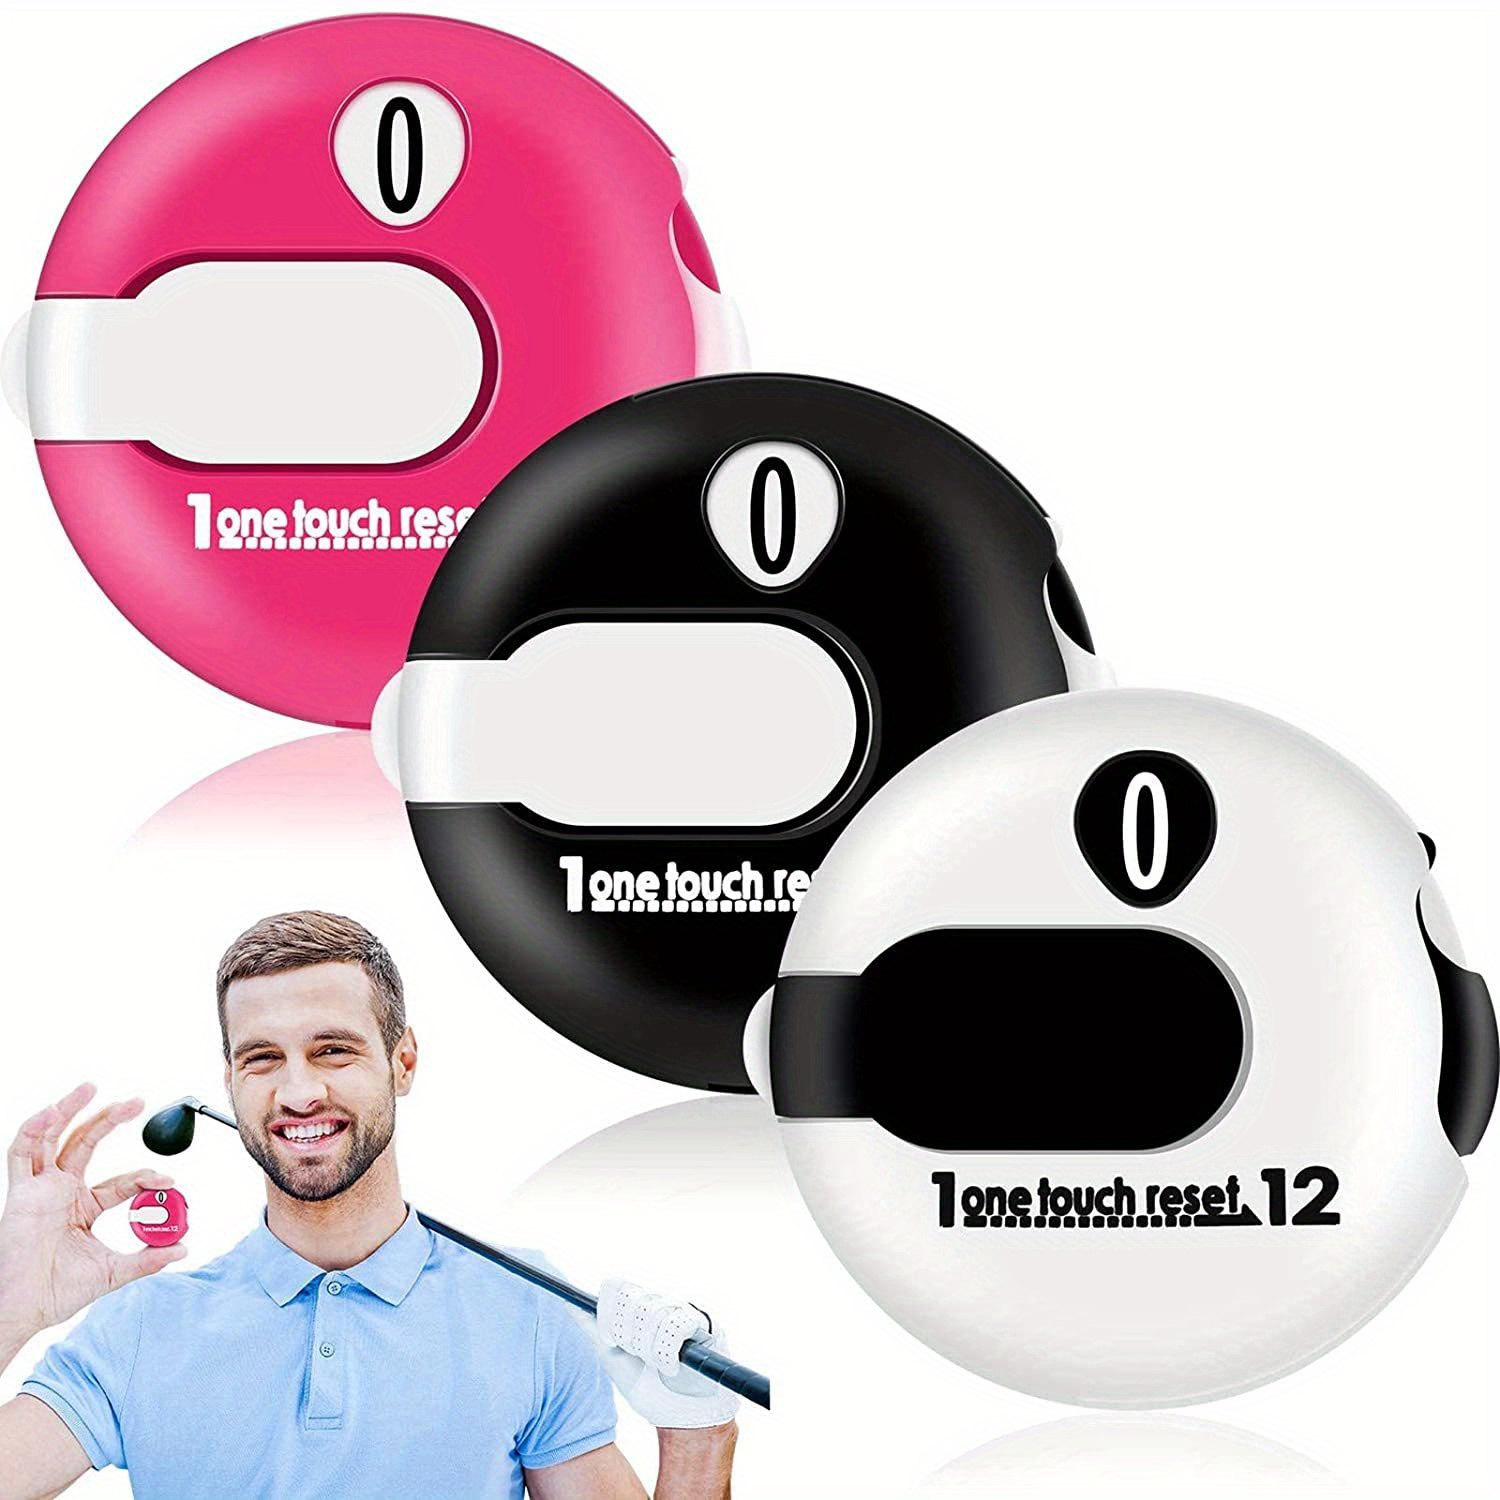 

3pcs Portable Golf Score Counter - Keep Track Of Your Score With Ease - Compact And Lightweight Golf Accessory